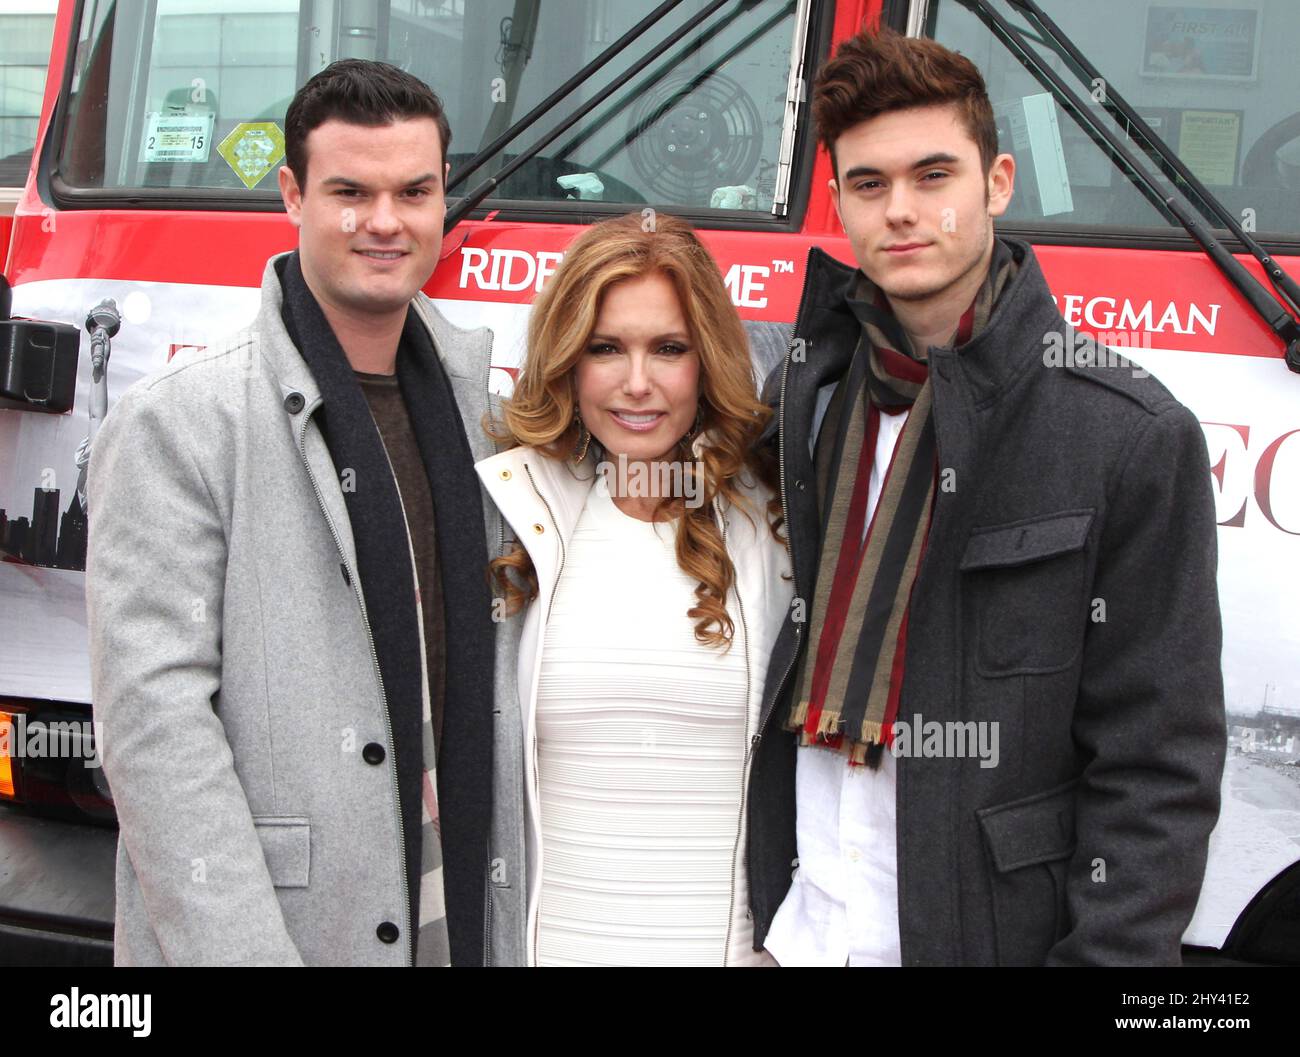 Tracey Bregman, son Austin Recht and son Landon Recht attending 'Ride Of Fame' Honors Tracey Bregman at Pier 78 on April 7, 2014. Stock Photo